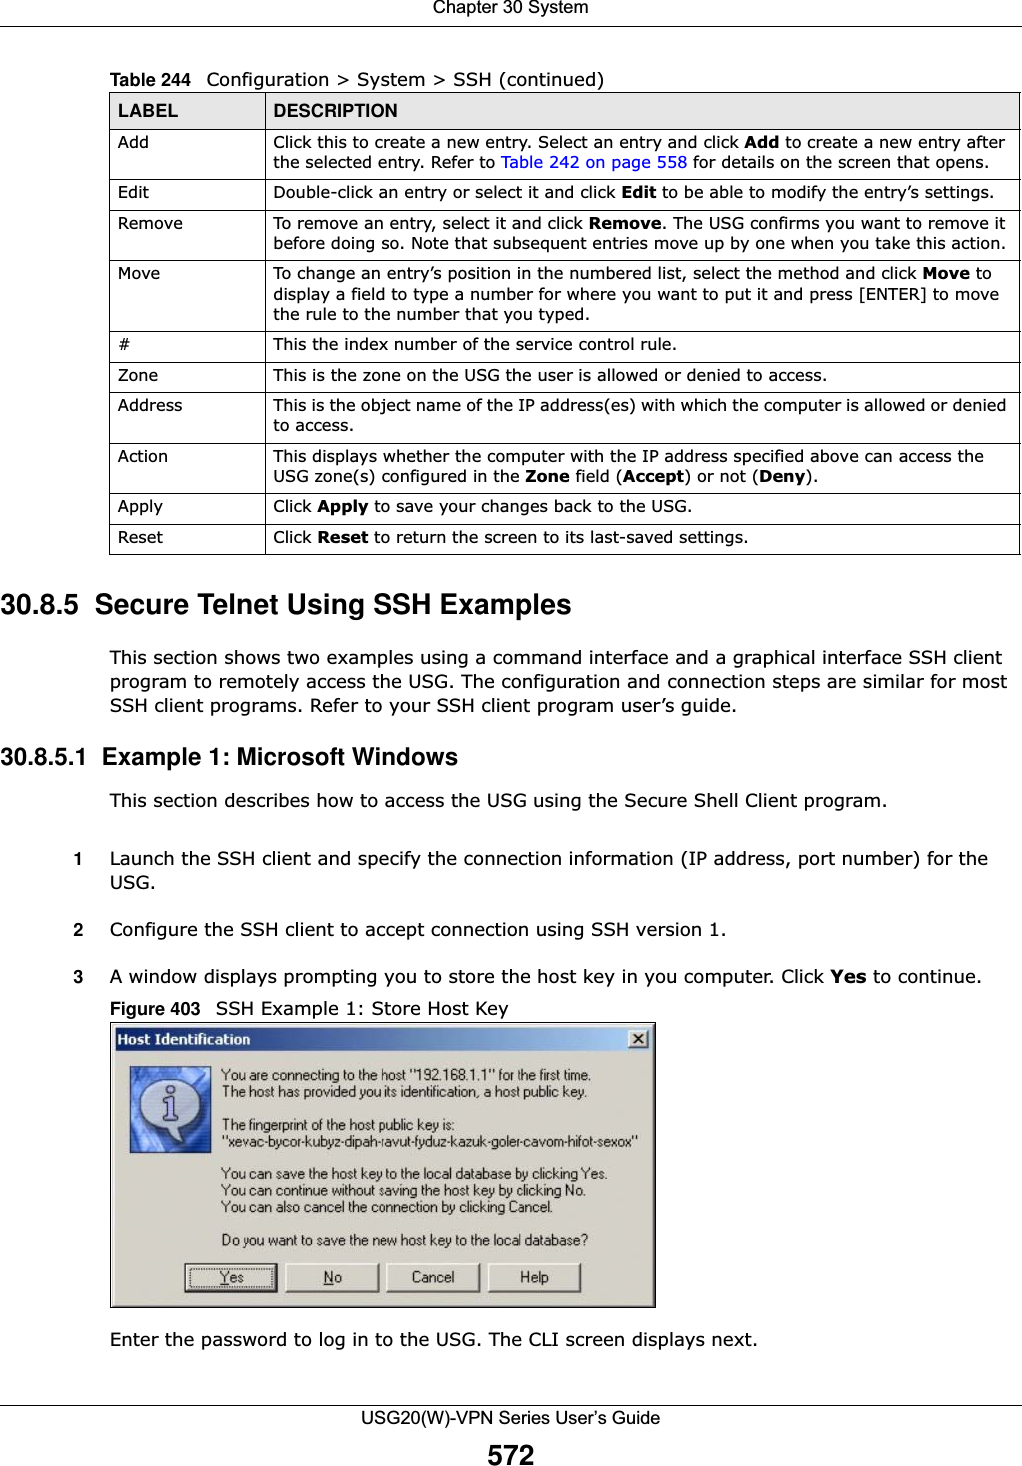 Chapter 30 SystemUSG20(W)-VPN Series User’s Guide57230.8.5  Secure Telnet Using SSH ExamplesThis section shows two examples using a command interface and a graphical interface SSH client program to remotely access the USG. The configuration and connection steps are similar for most SSH client programs. Refer to your SSH client program user’s guide.30.8.5.1  Example 1: Microsoft Windows This section describes how to access the USG using the Secure Shell Client program.1Launch the SSH client and specify the connection information (IP address, port number) for the USG. 2Configure the SSH client to accept connection using SSH version 1. 3A window displays prompting you to store the host key in you computer. Click Yes to continue. Figure 403   SSH Example 1: Store Host KeyEnter the password to log in to the USG. The CLI screen displays next. Add Click this to create a new entry. Select an entry and click Add to create a new entry after the selected entry. Refer to Table 242 on page 558 for details on the screen that opens.Edit Double-click an entry or select it and click Edit to be able to modify the entry’s settings. Remove To remove an entry, select it and click Remove. The USG confirms you want to remove it before doing so. Note that subsequent entries move up by one when you take this action.Move To change an entry’s position in the numbered list, select the method and click Move to display a field to type a number for where you want to put it and press [ENTER] to move the rule to the number that you typed.#This the index number of the service control rule.Zone This is the zone on the USG the user is allowed or denied to access.Address This is the object name of the IP address(es) with which the computer is allowed or denied to access.Action This displays whether the computer with the IP address specified above can access the USG zone(s) configured in the Zone field (Accept) or not (Deny).Apply Click Apply to save your changes back to the USG. Reset Click Reset to return the screen to its last-saved settings. Table 244   Configuration &gt; System &gt; SSH (continued)LABEL DESCRIPTION